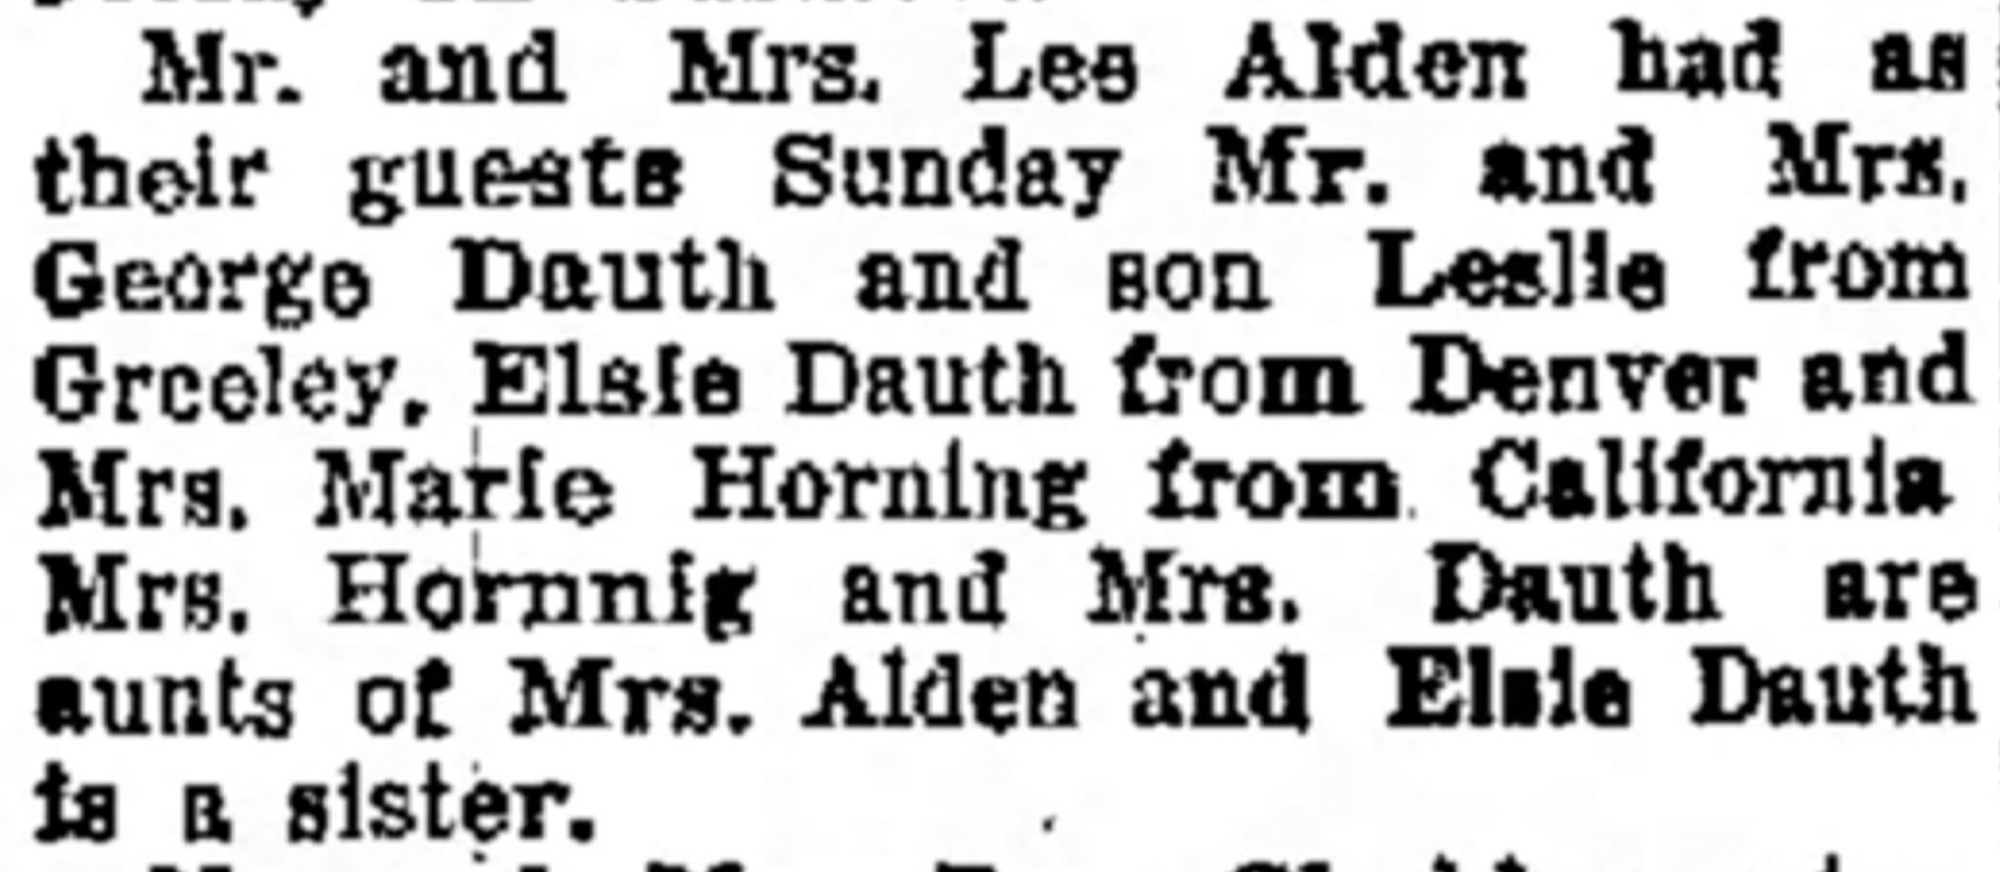 Dauth Family Archive - 1931-11-19 - Greeley Daily Tribune - Elsie Dauth at Louise Alden Party